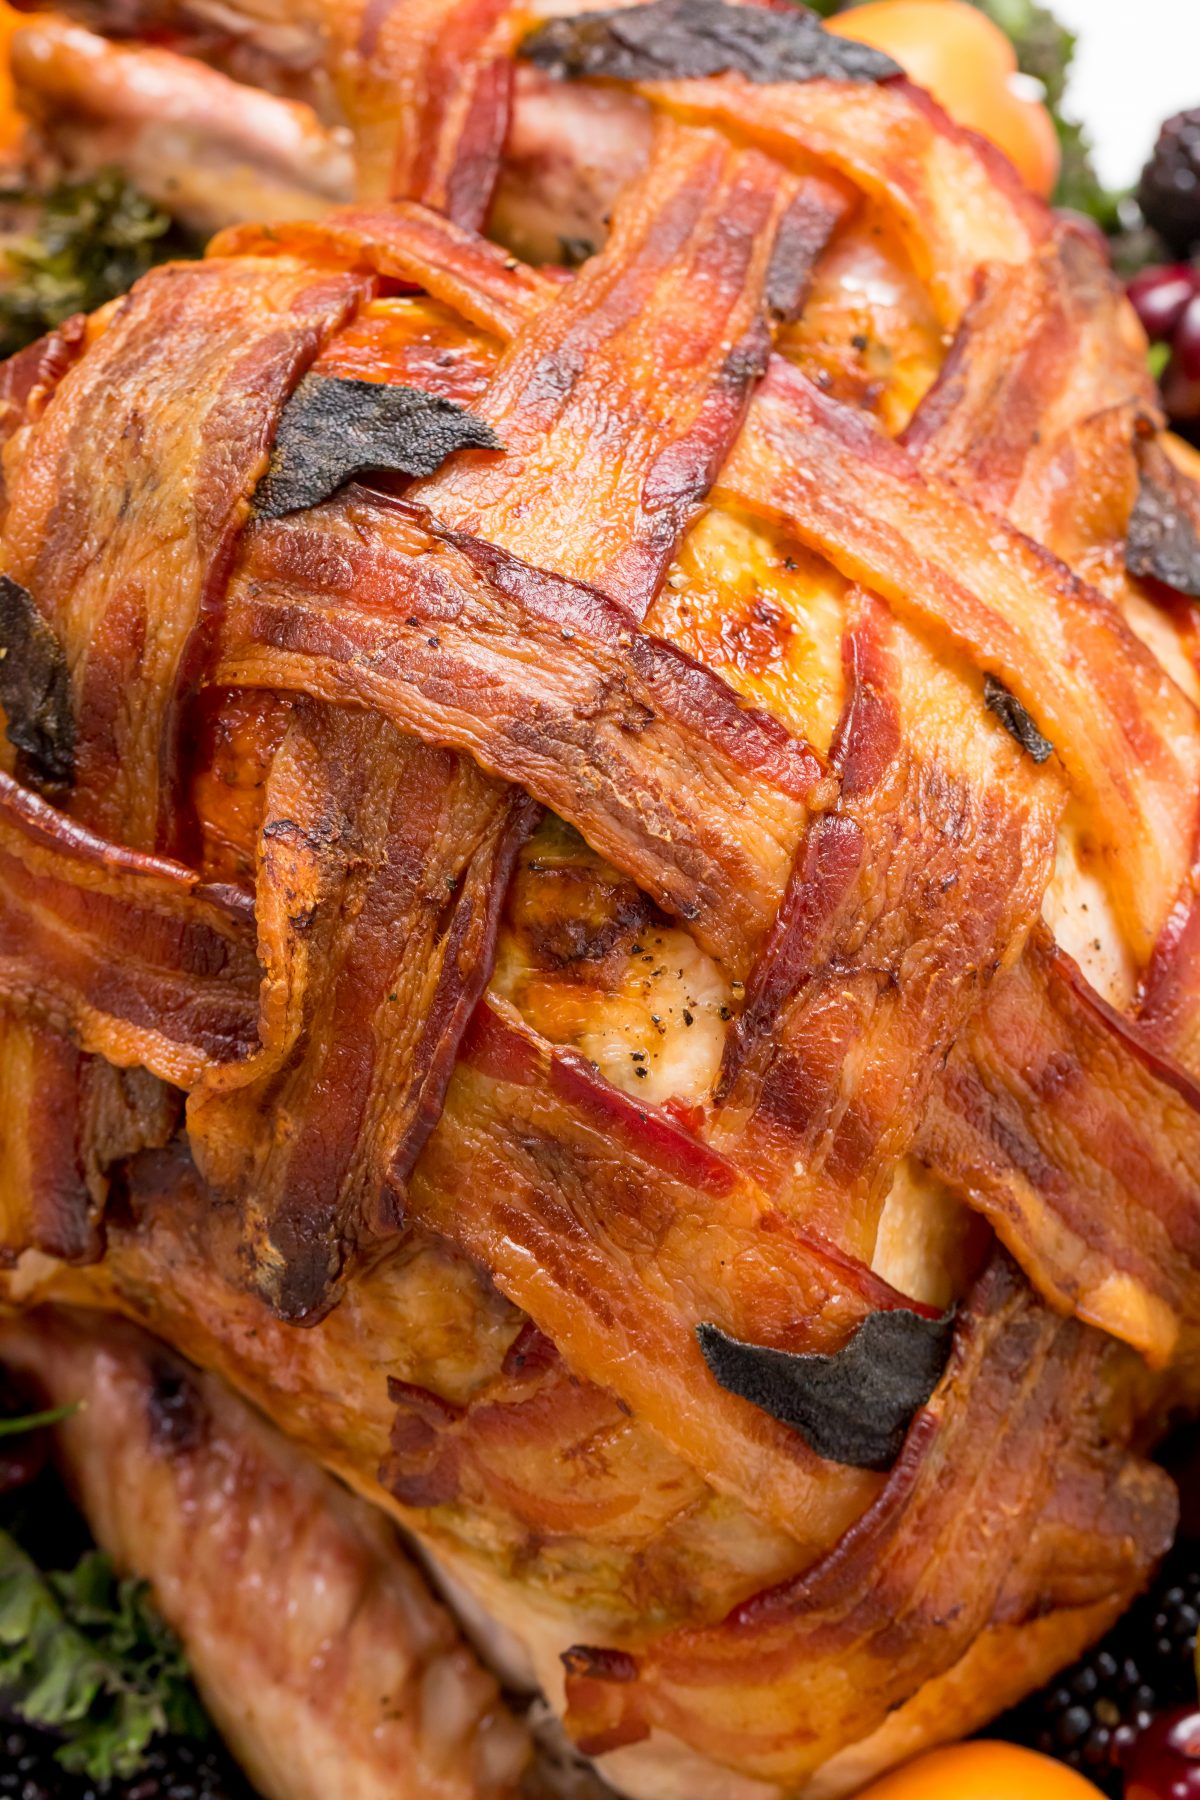 5D4B9739 - Bacon Wrapped Turkey - close-up of cooked bacon wrapped turkey